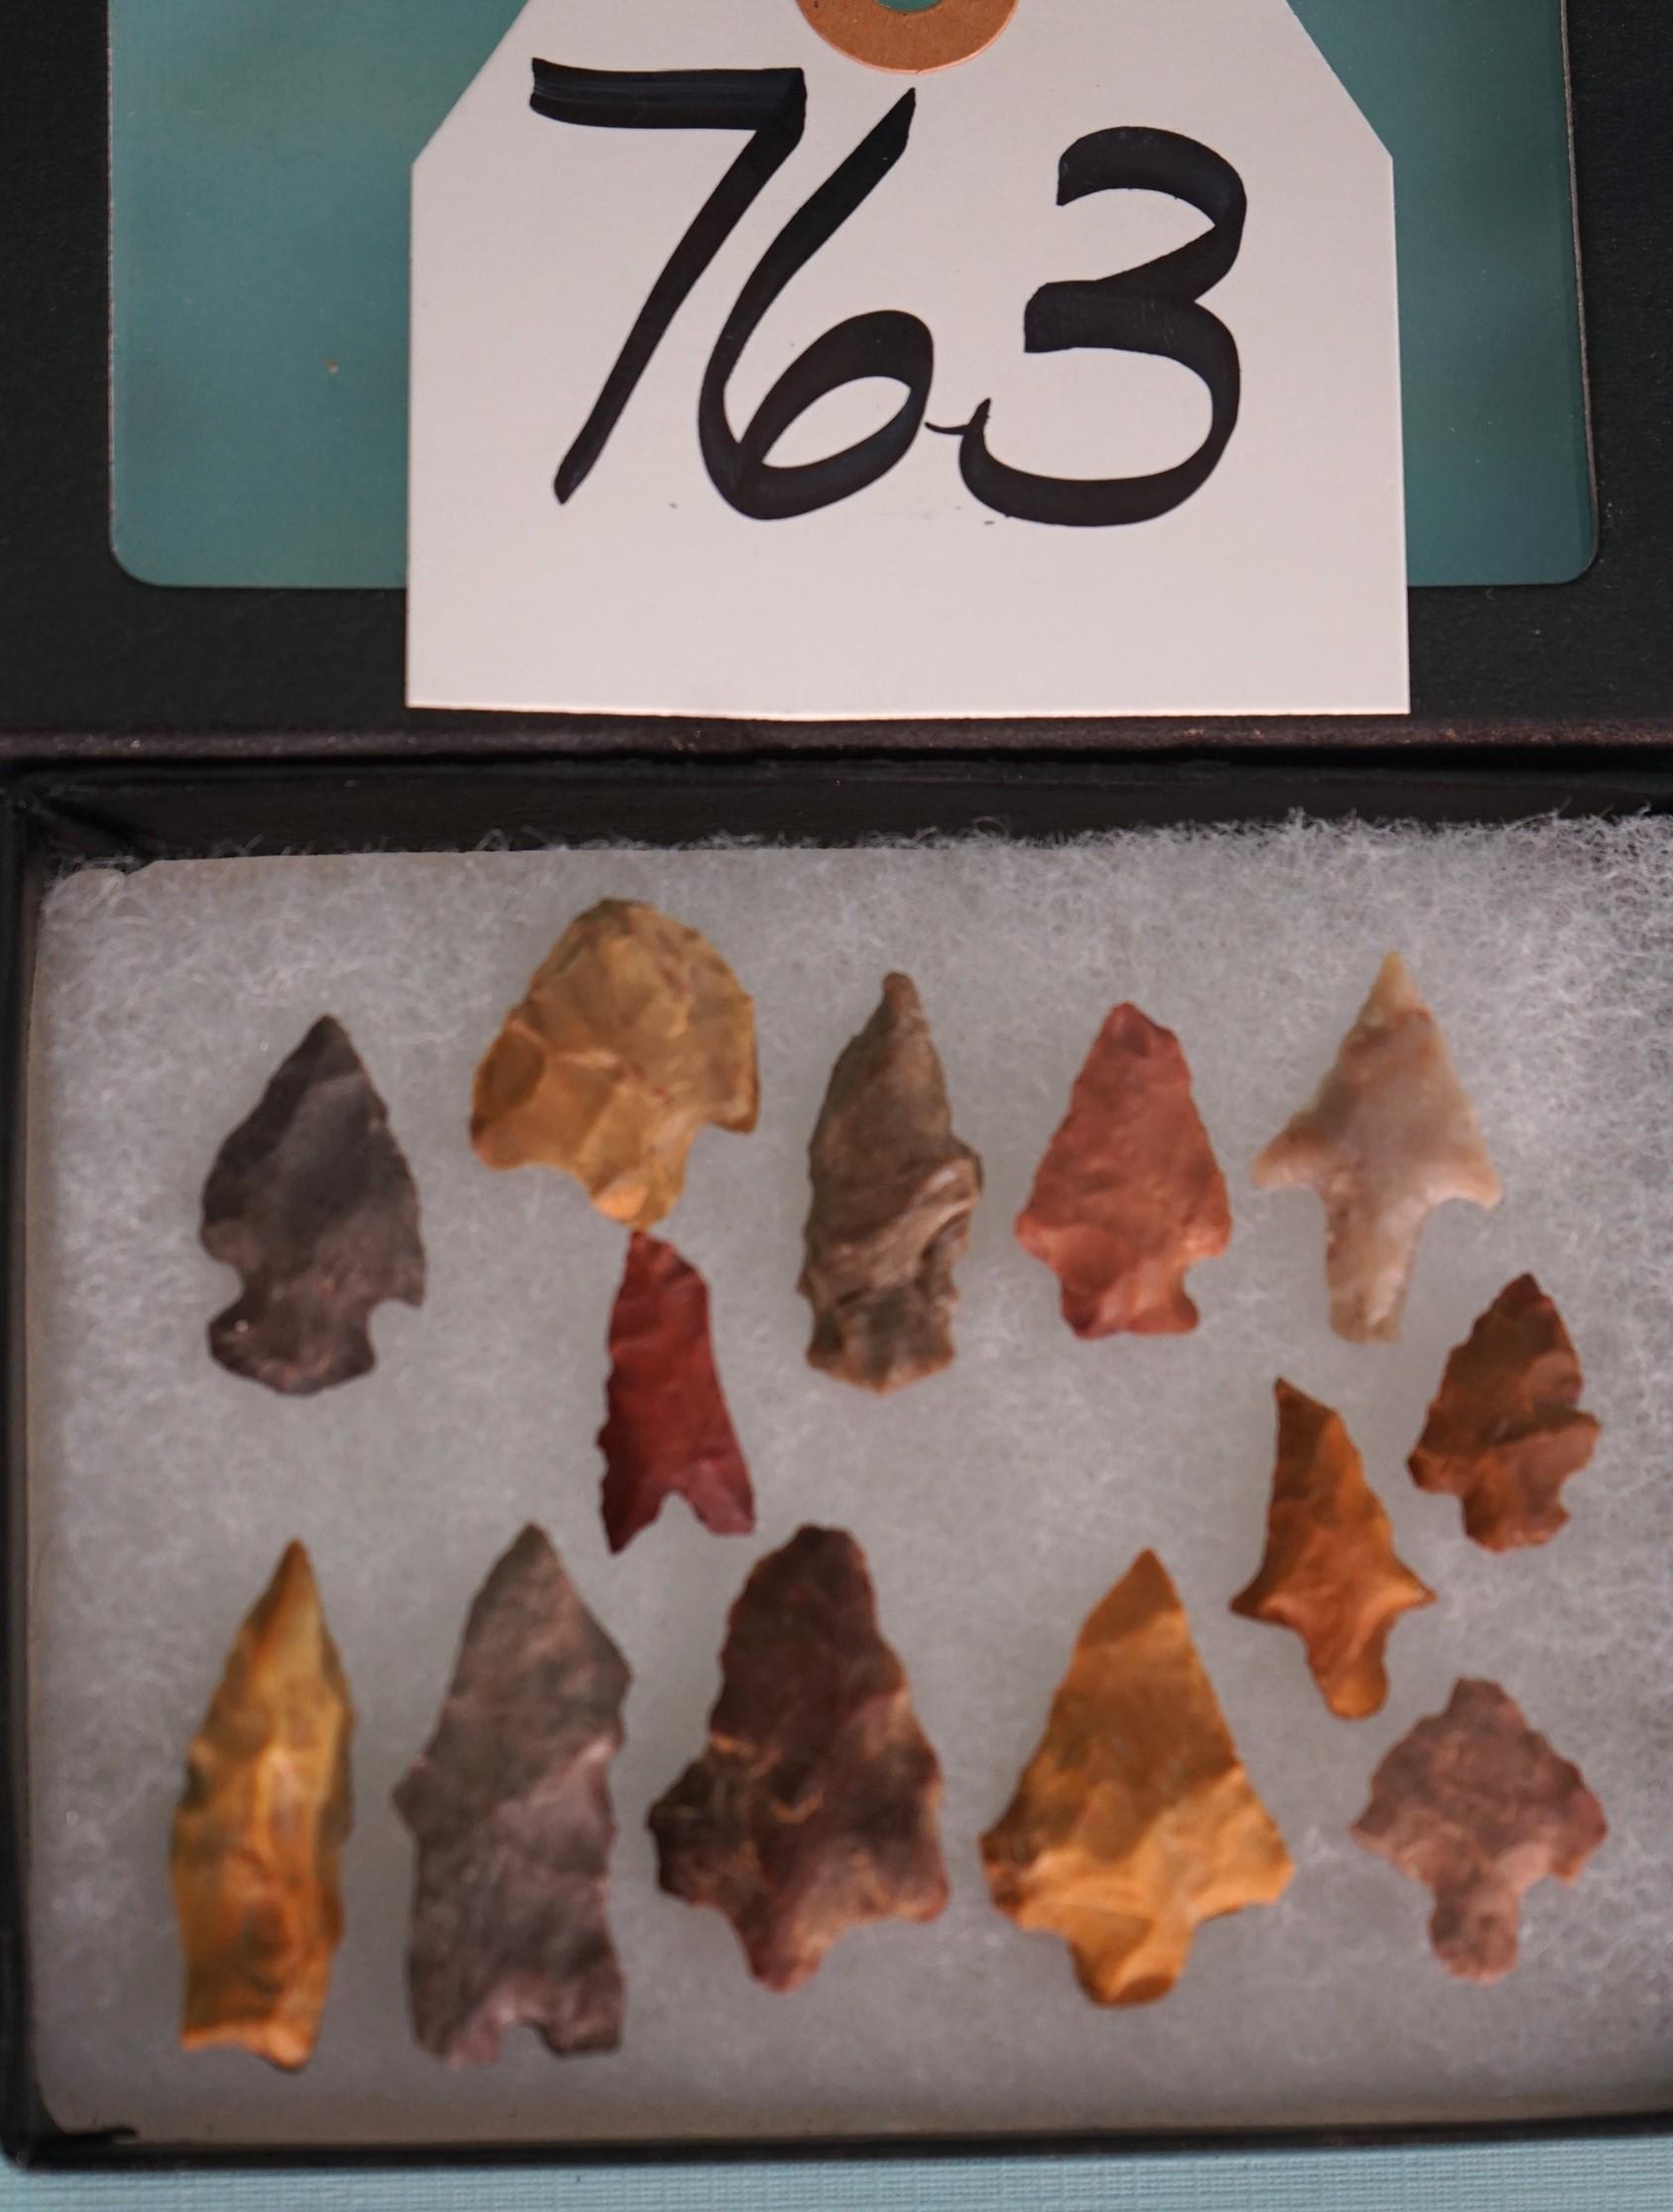 13 Authentic "Bird Point" Arrowheads in Display Case from New Mexico & Colorado Artifacts